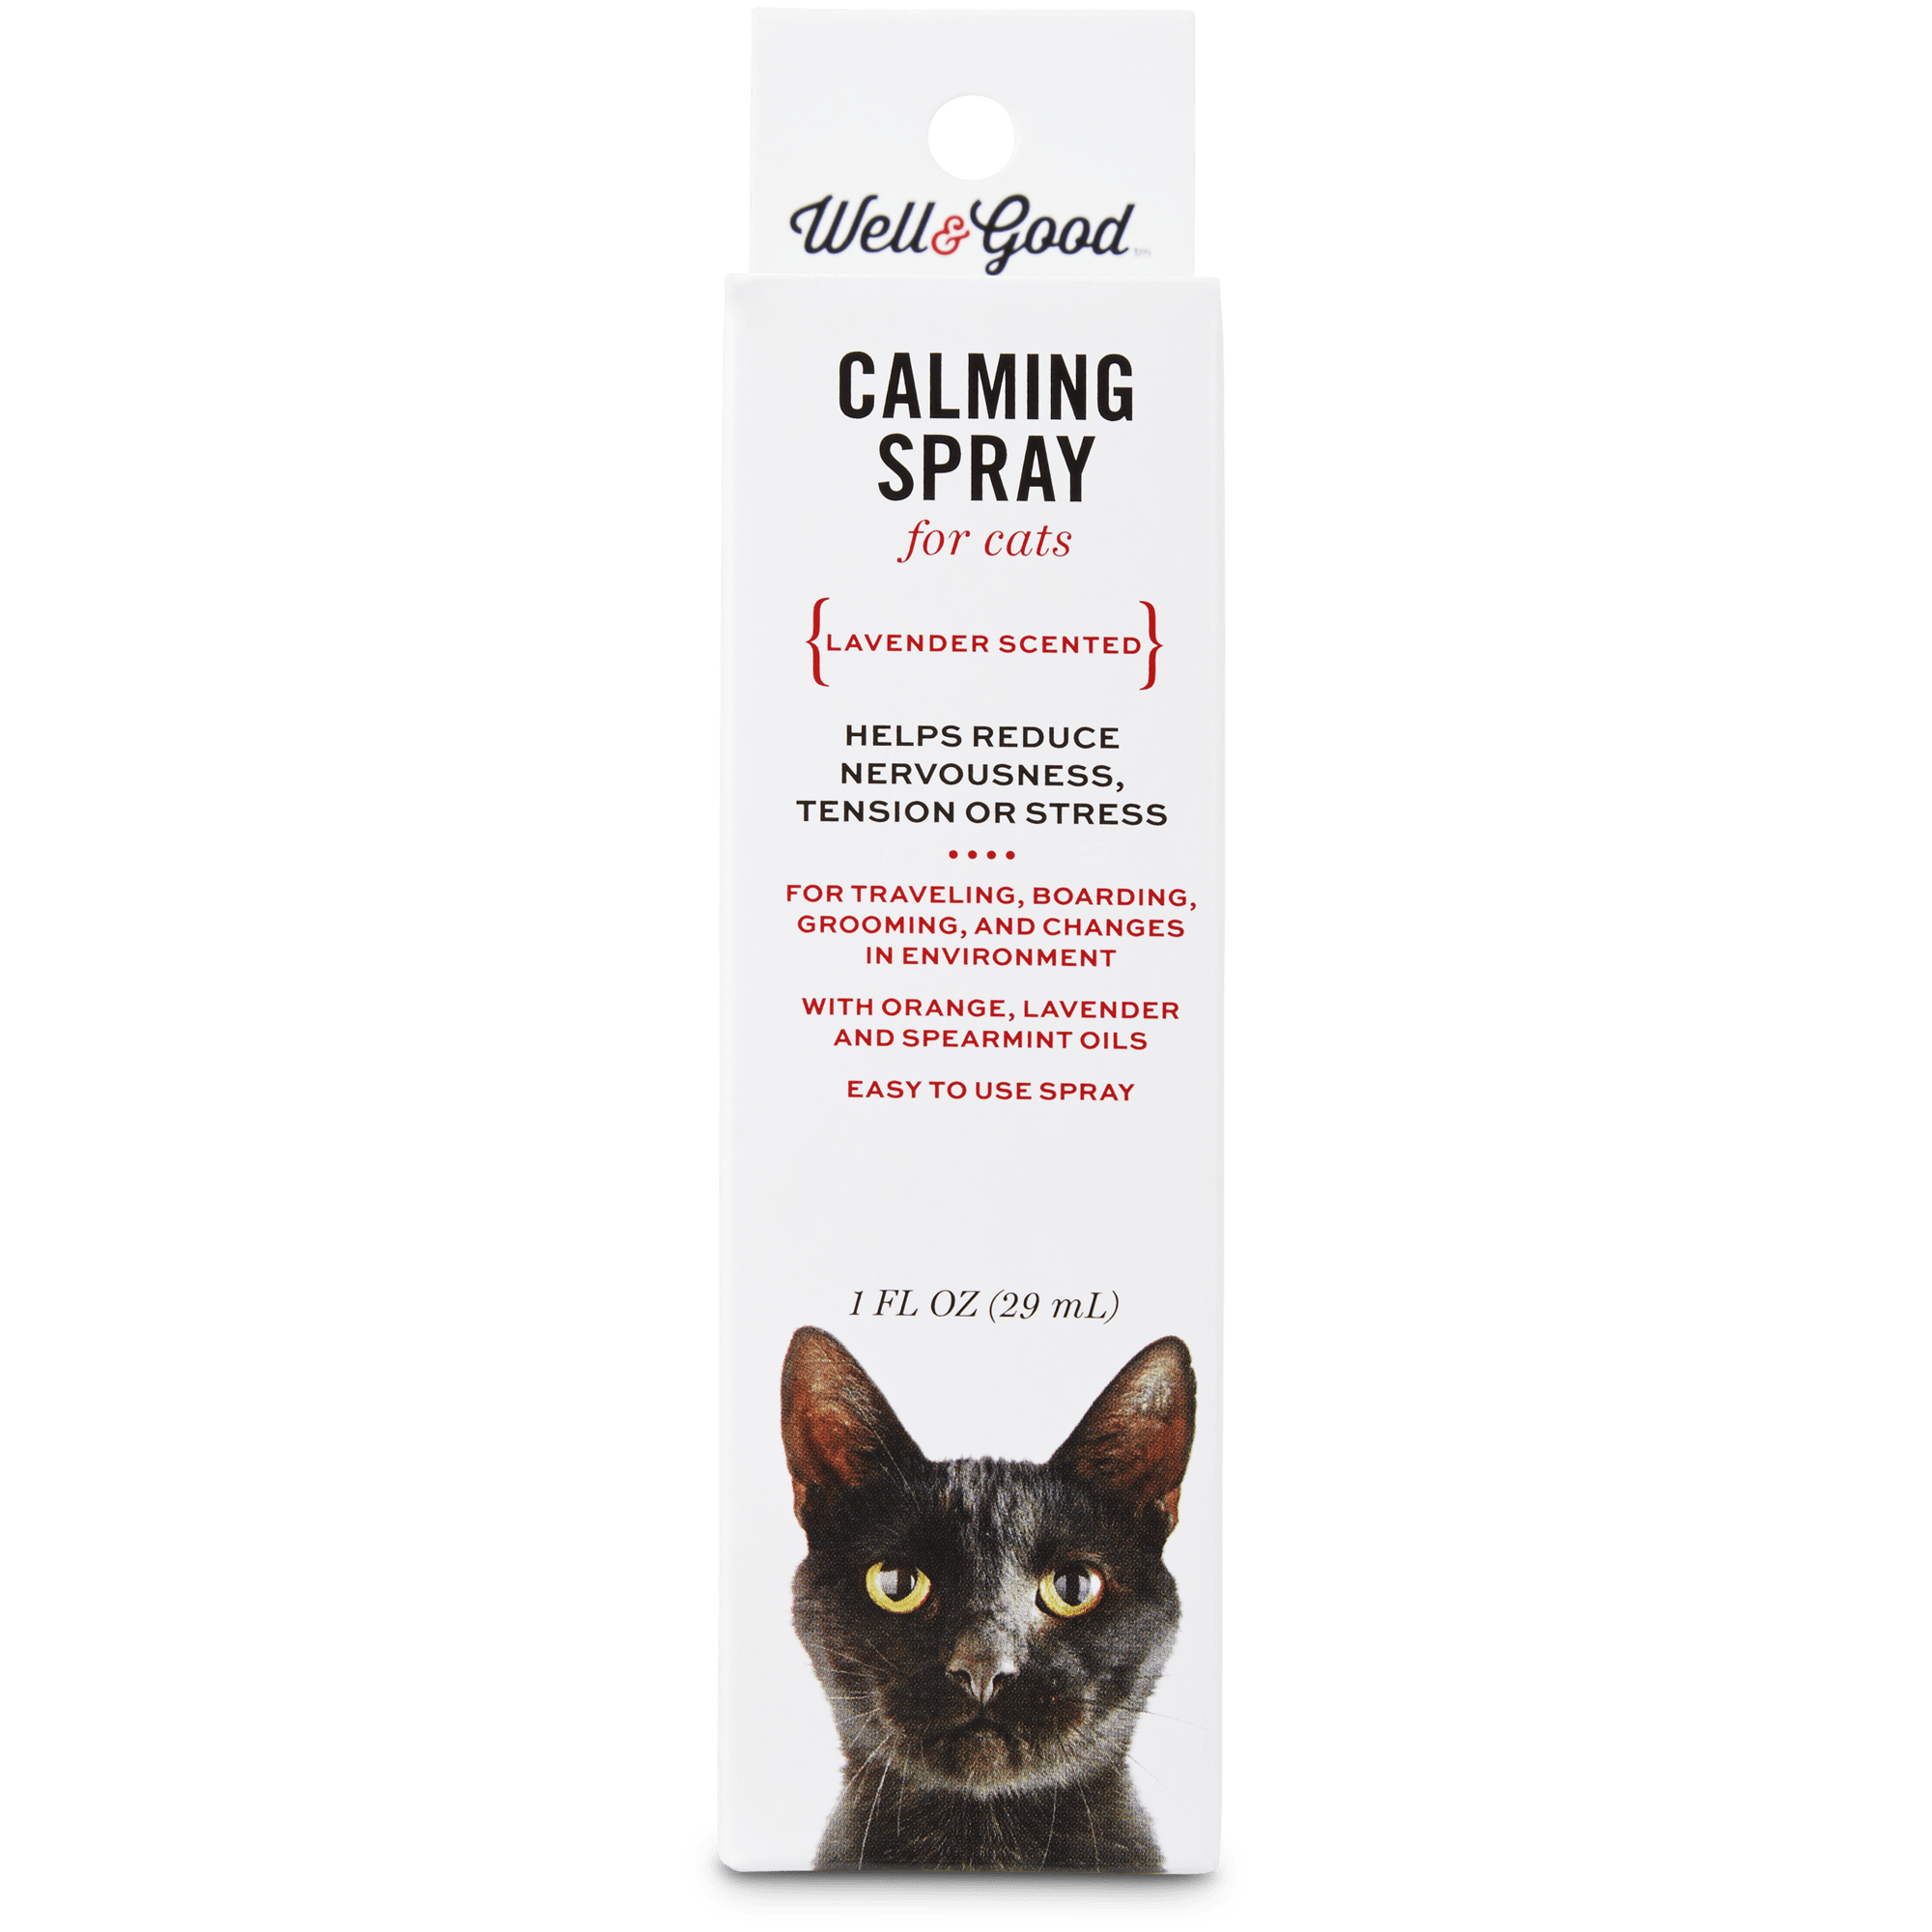 cats and citrus spray